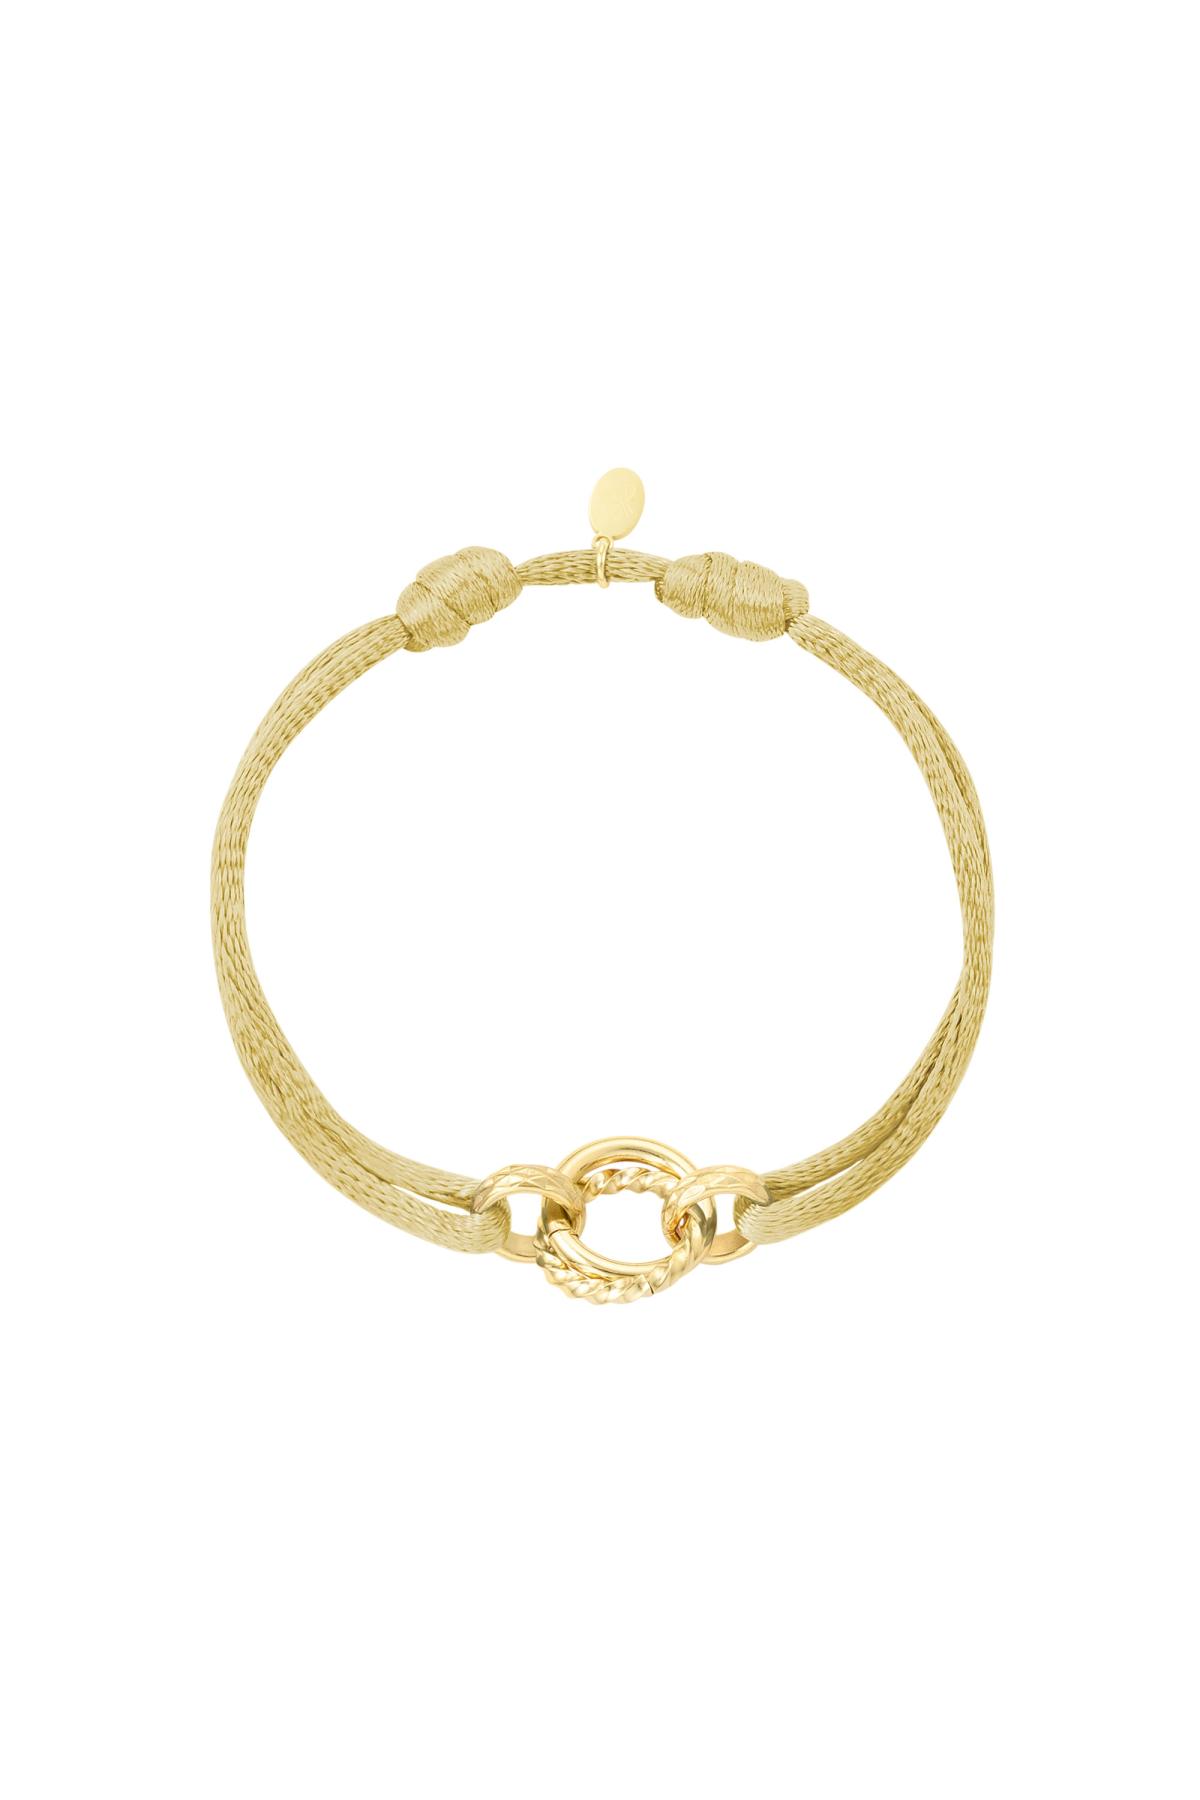 Fabric bracelet circle Beige & Gold Stainless Steel 